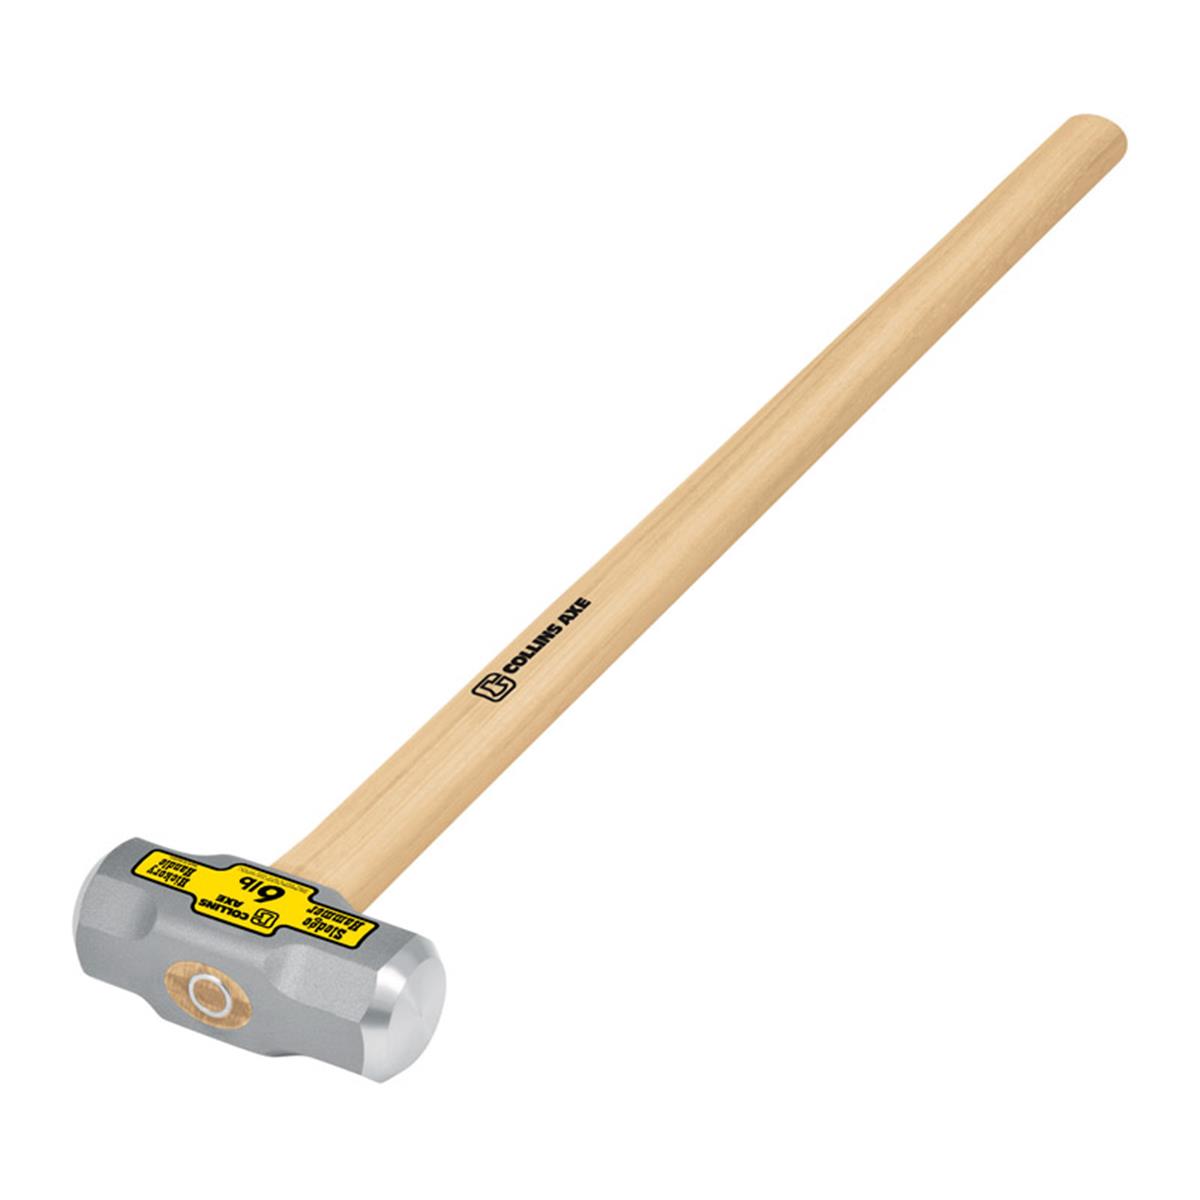 Md-6h-c32425 2 Face Sledge Hammer Collins